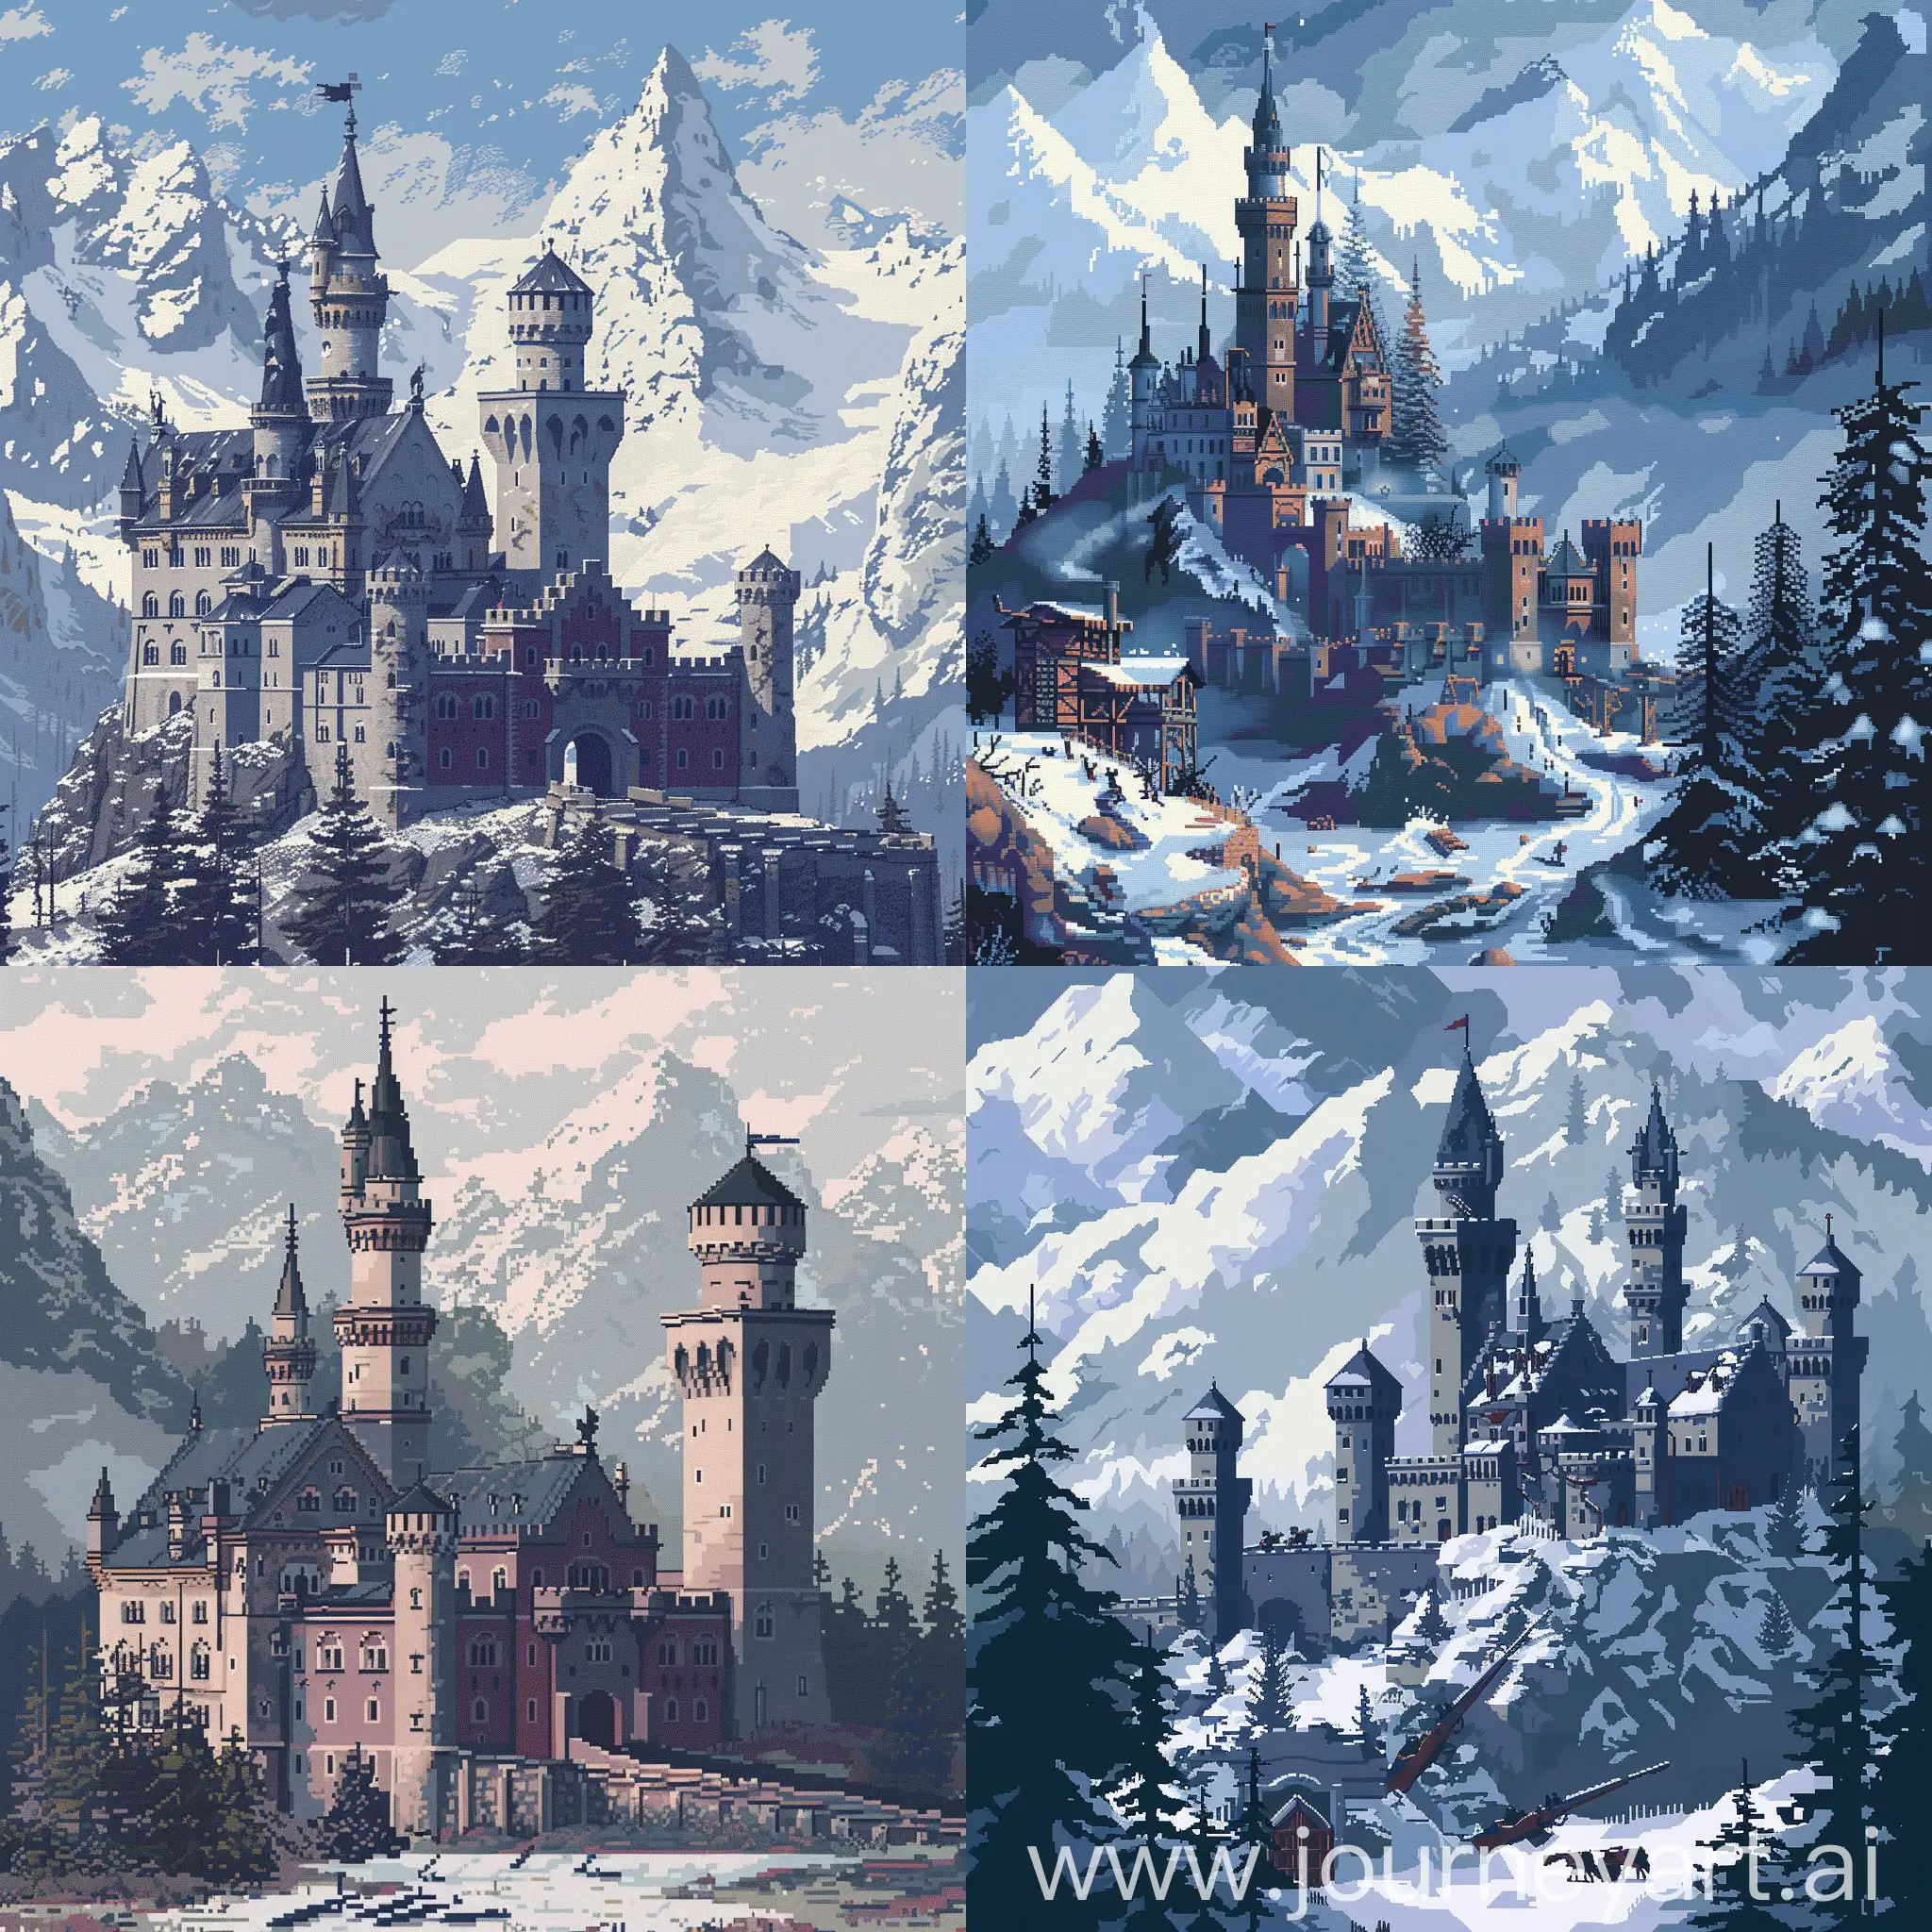 Pixel arts, cold colors, siege of castle in 1930 with guns, castle on the mountain